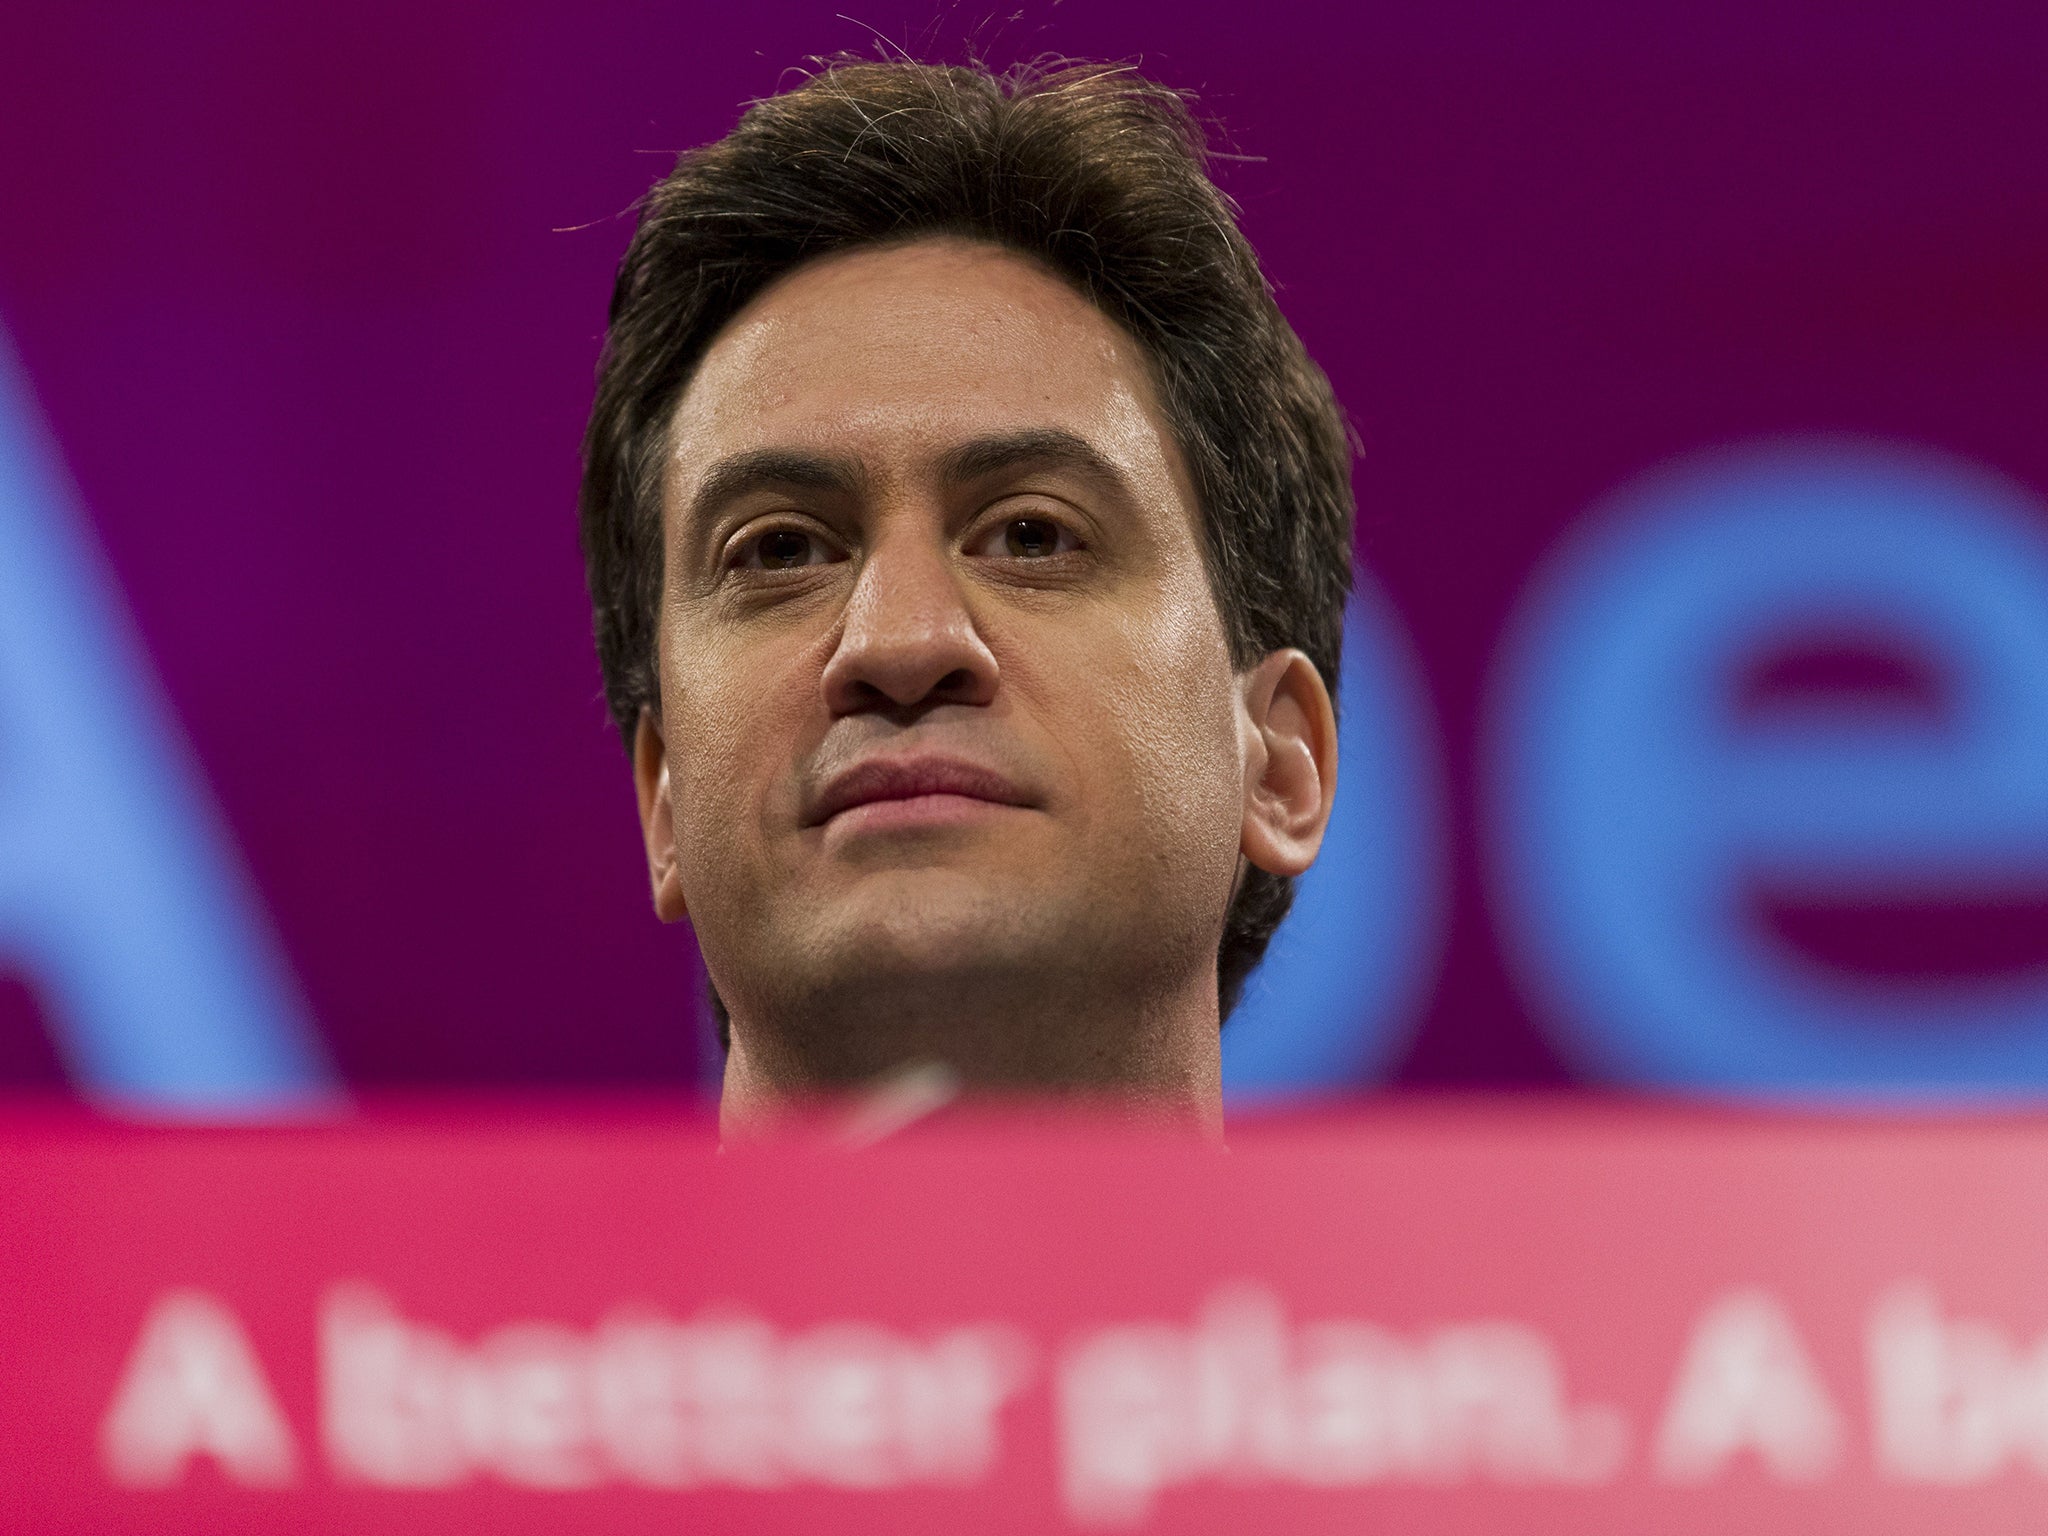 Ed Miliband will still face questions over whether he will pursue a confidence and supply arrangement with Nicola Sturgeon's party